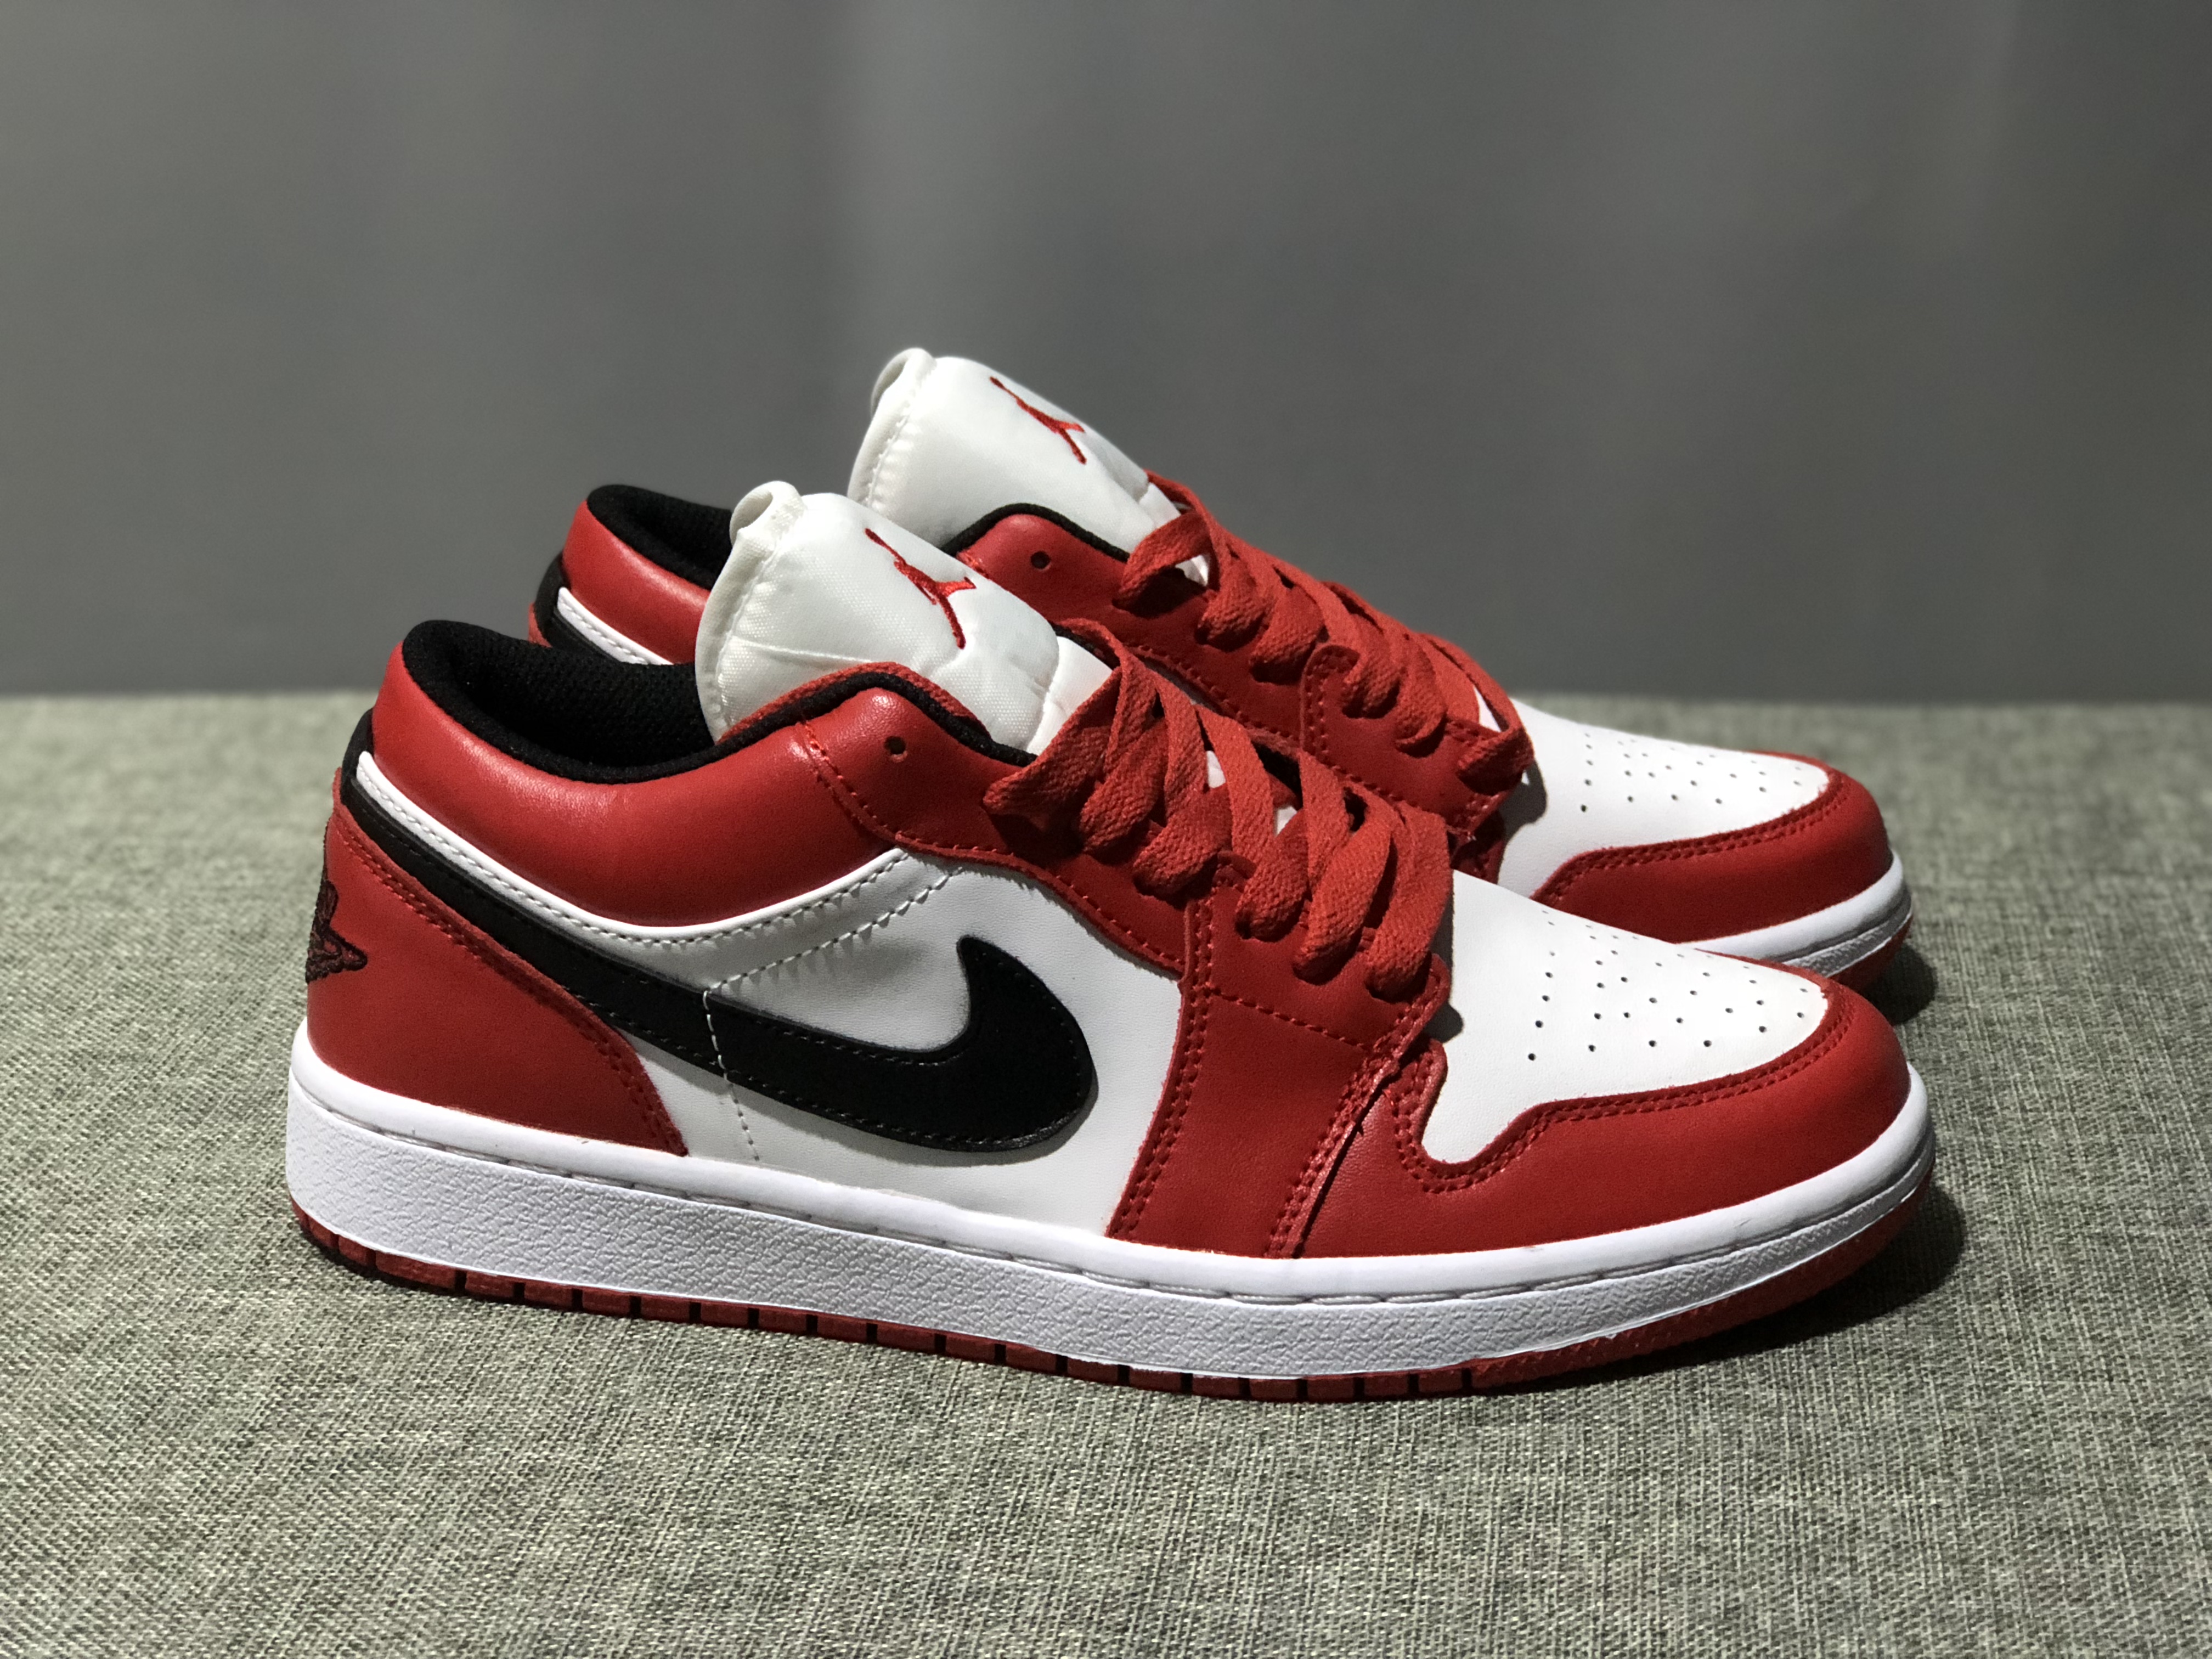 Air Jordan 1 Low Chicago Red Shoes